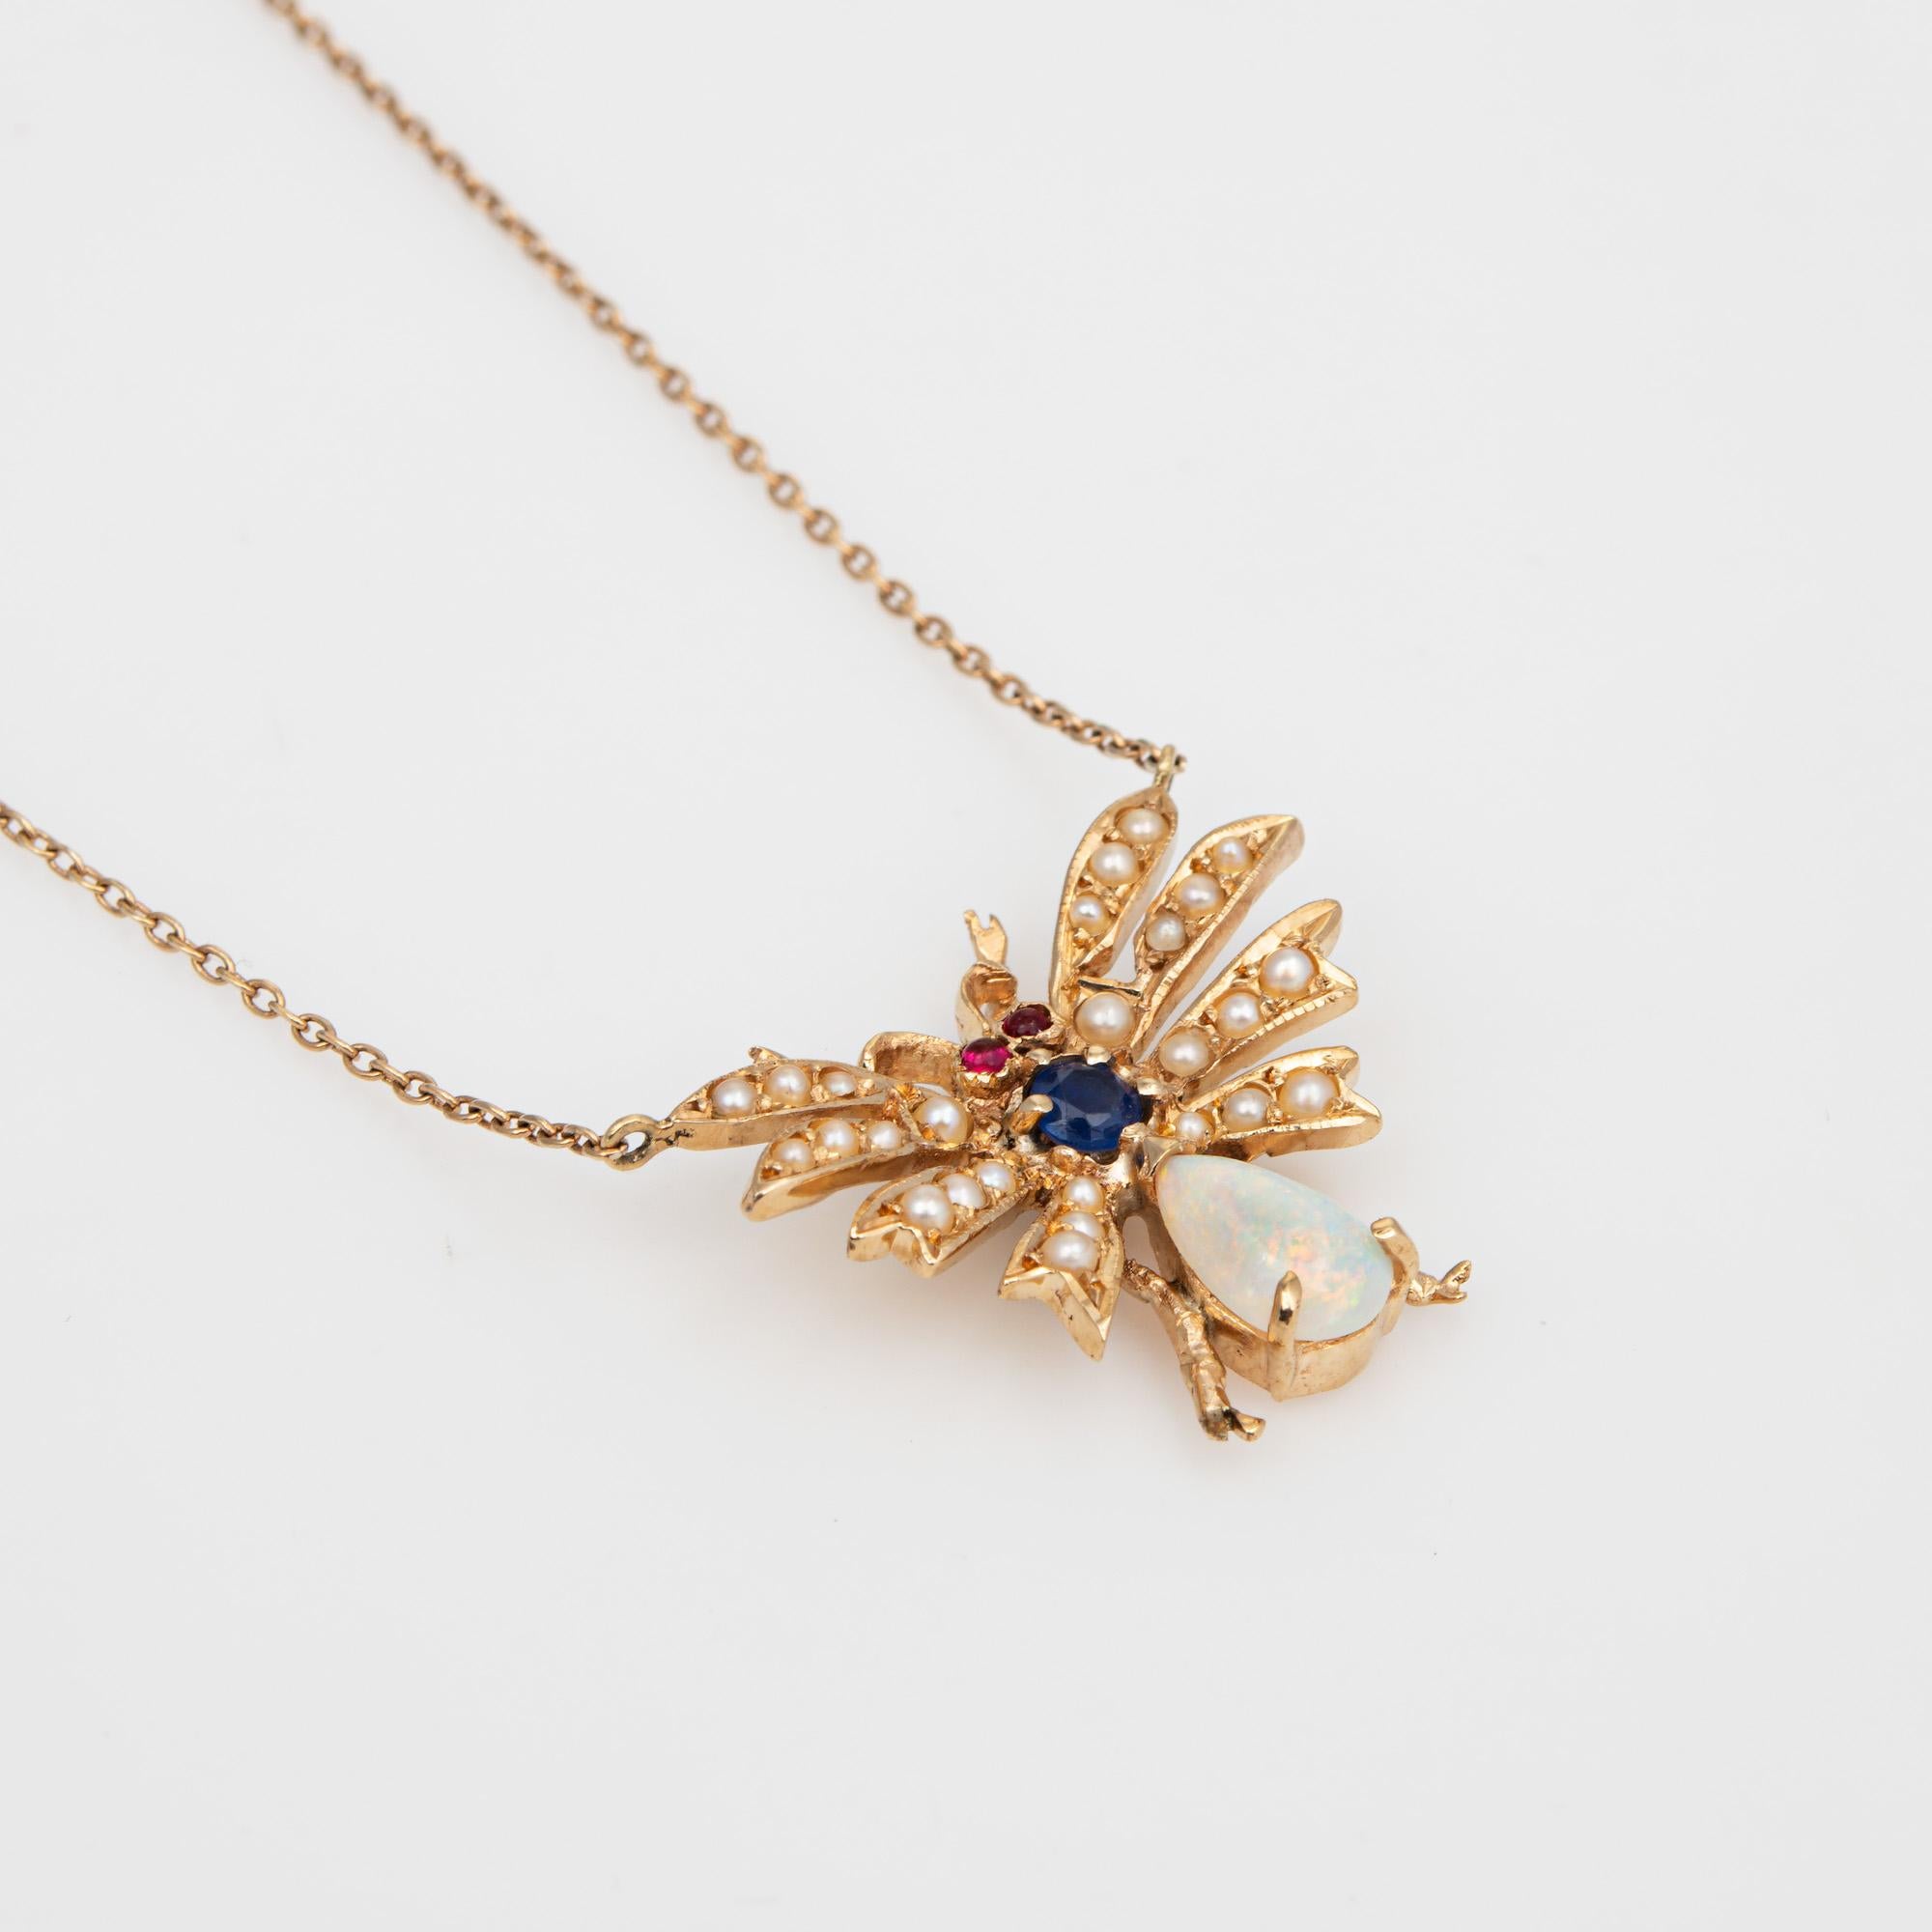 Art déco Vintage Art Deco Insect Necklace Opal Sapphire Seed Pearl Ruby 14k Gold 18.5